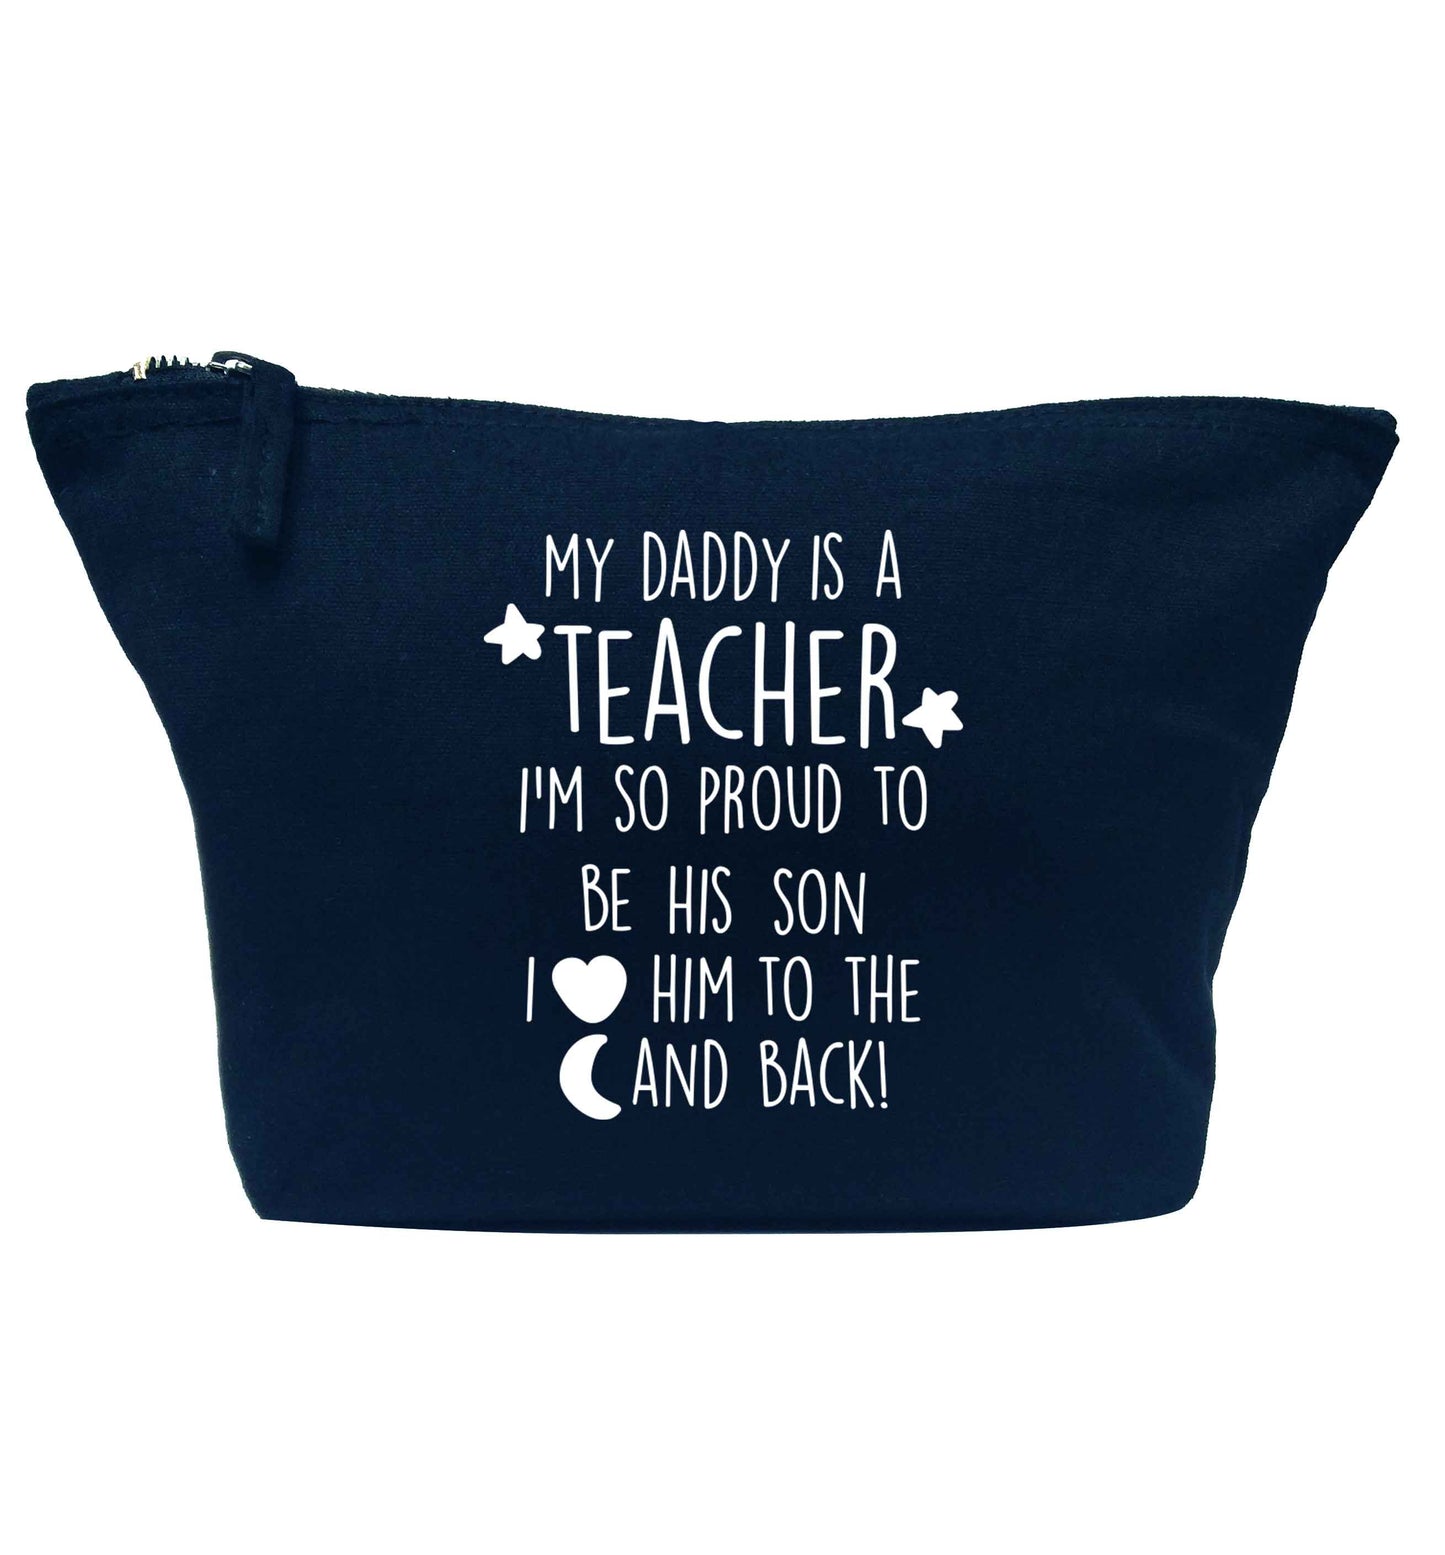 My daddy is a teacher I'm so proud to be his son I love her to the moon and back navy makeup bag